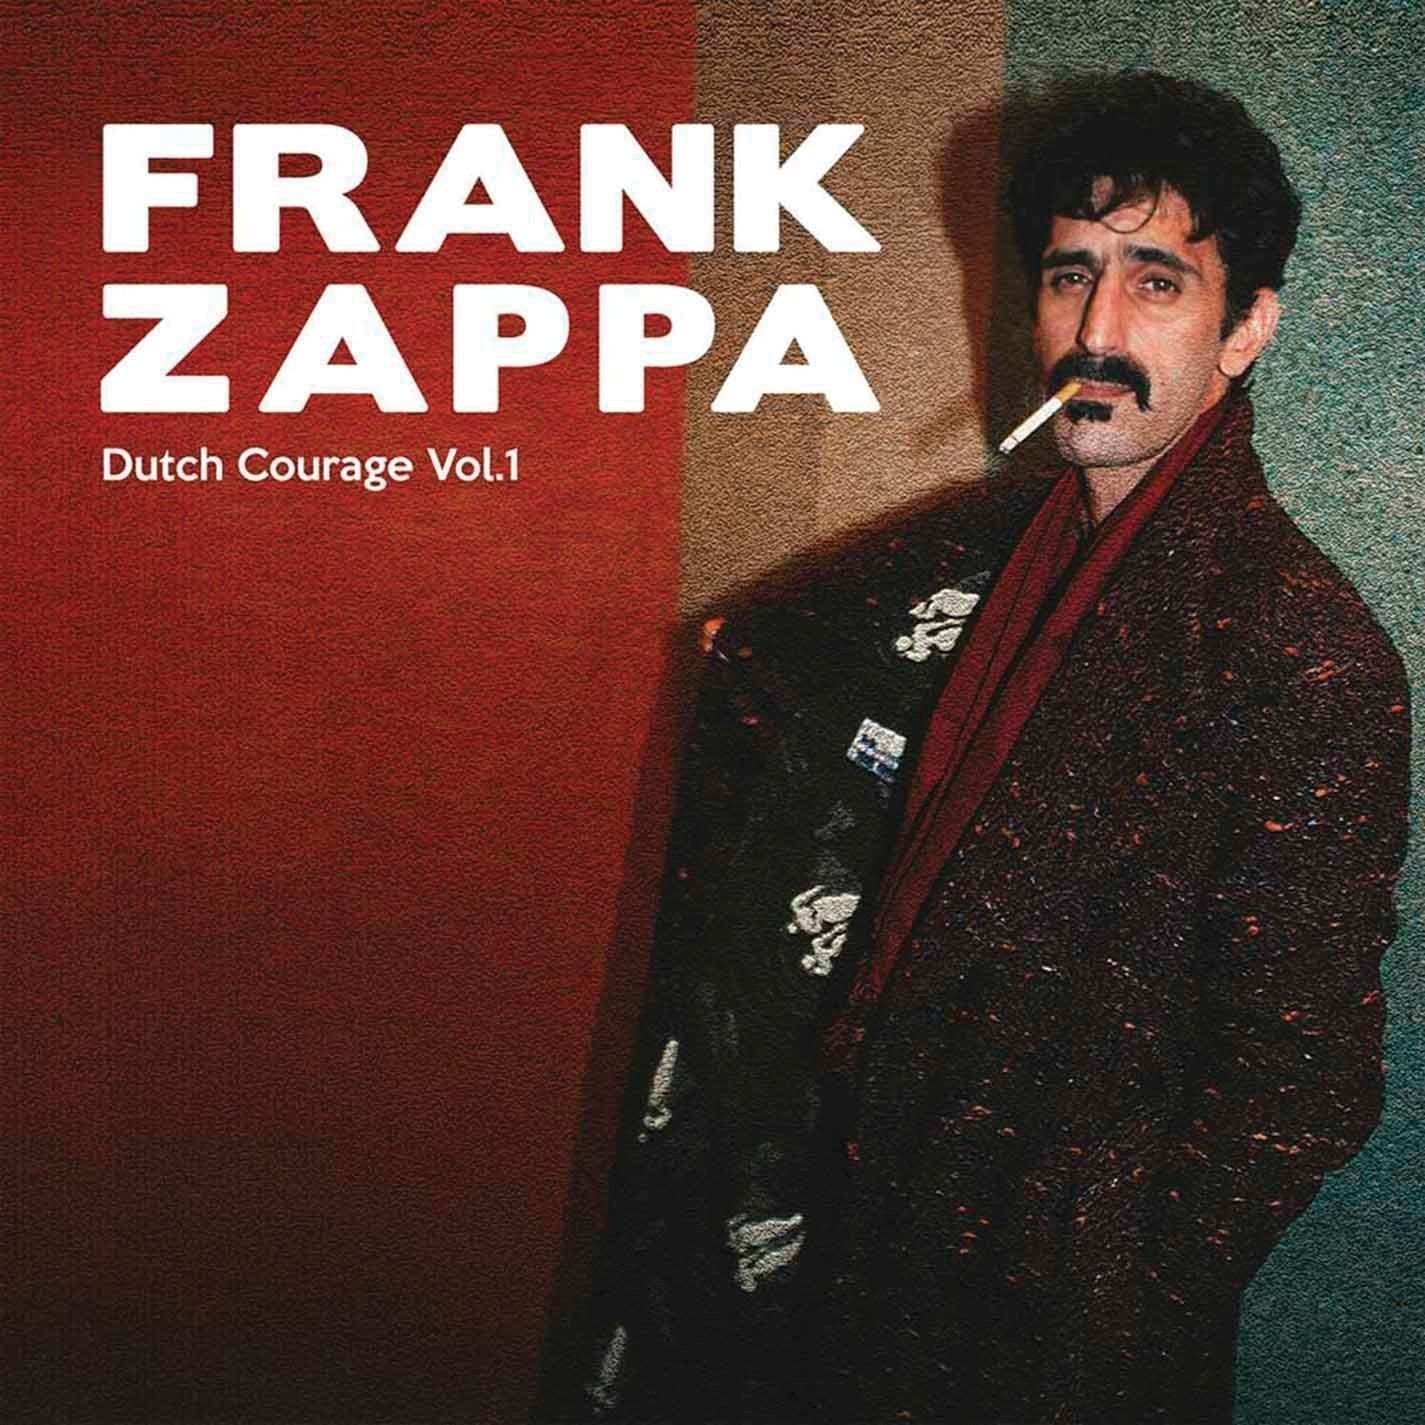 Vinylplade Frank Zappa - Dutch Courage Vol. 1 (Frank Zappa & The Mothers Of Invention) (2 LP)